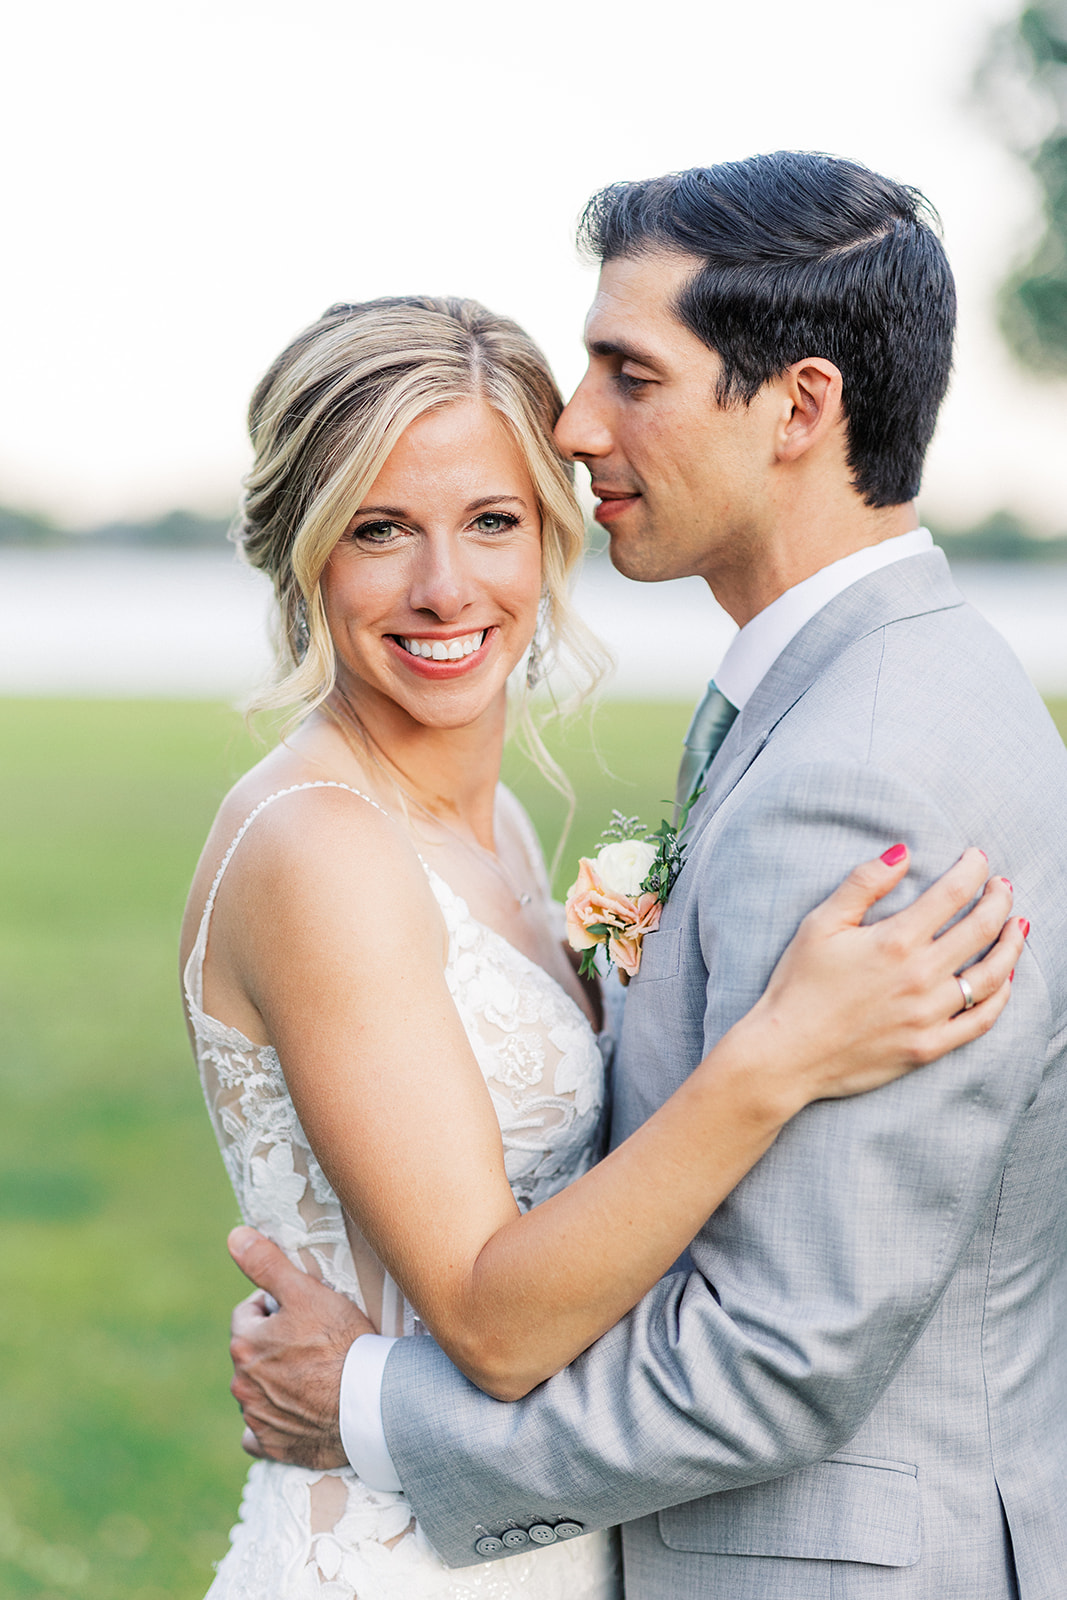 A bride smiles over her shoulder while standing in a lawn as her groom in a grey suit nuzzles her hair